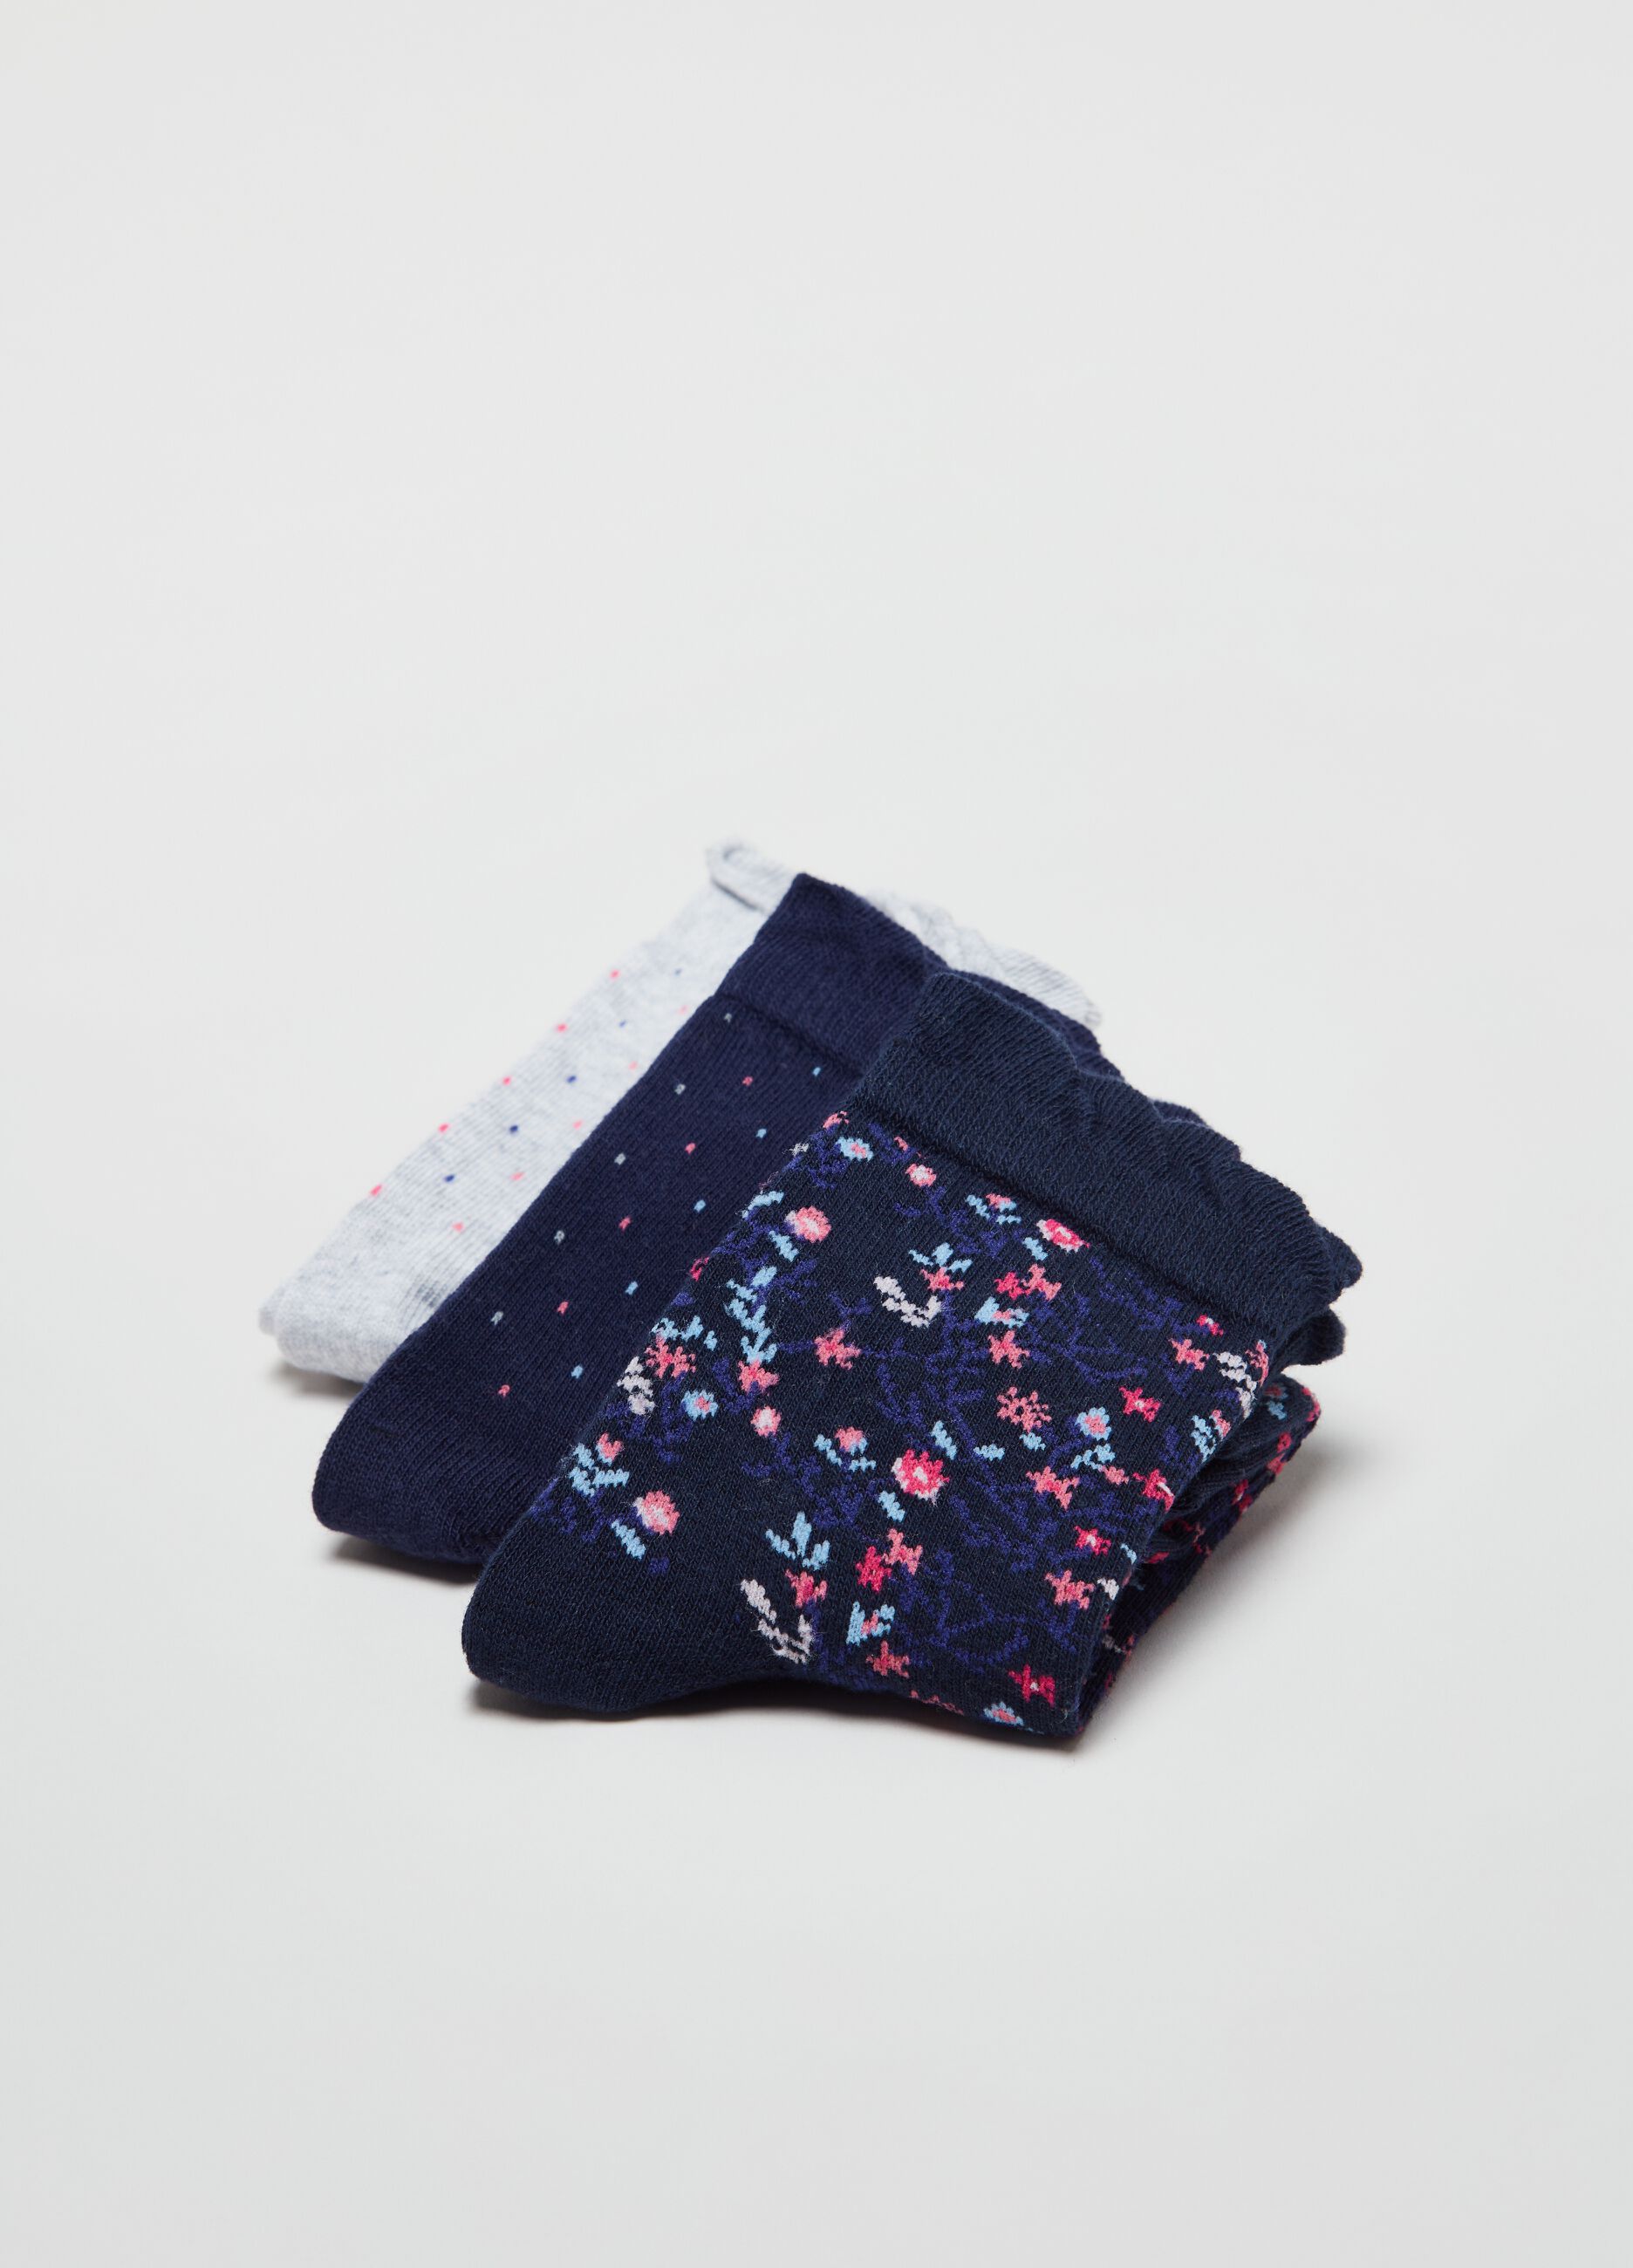 Three-pair pack socks in assorted patterns